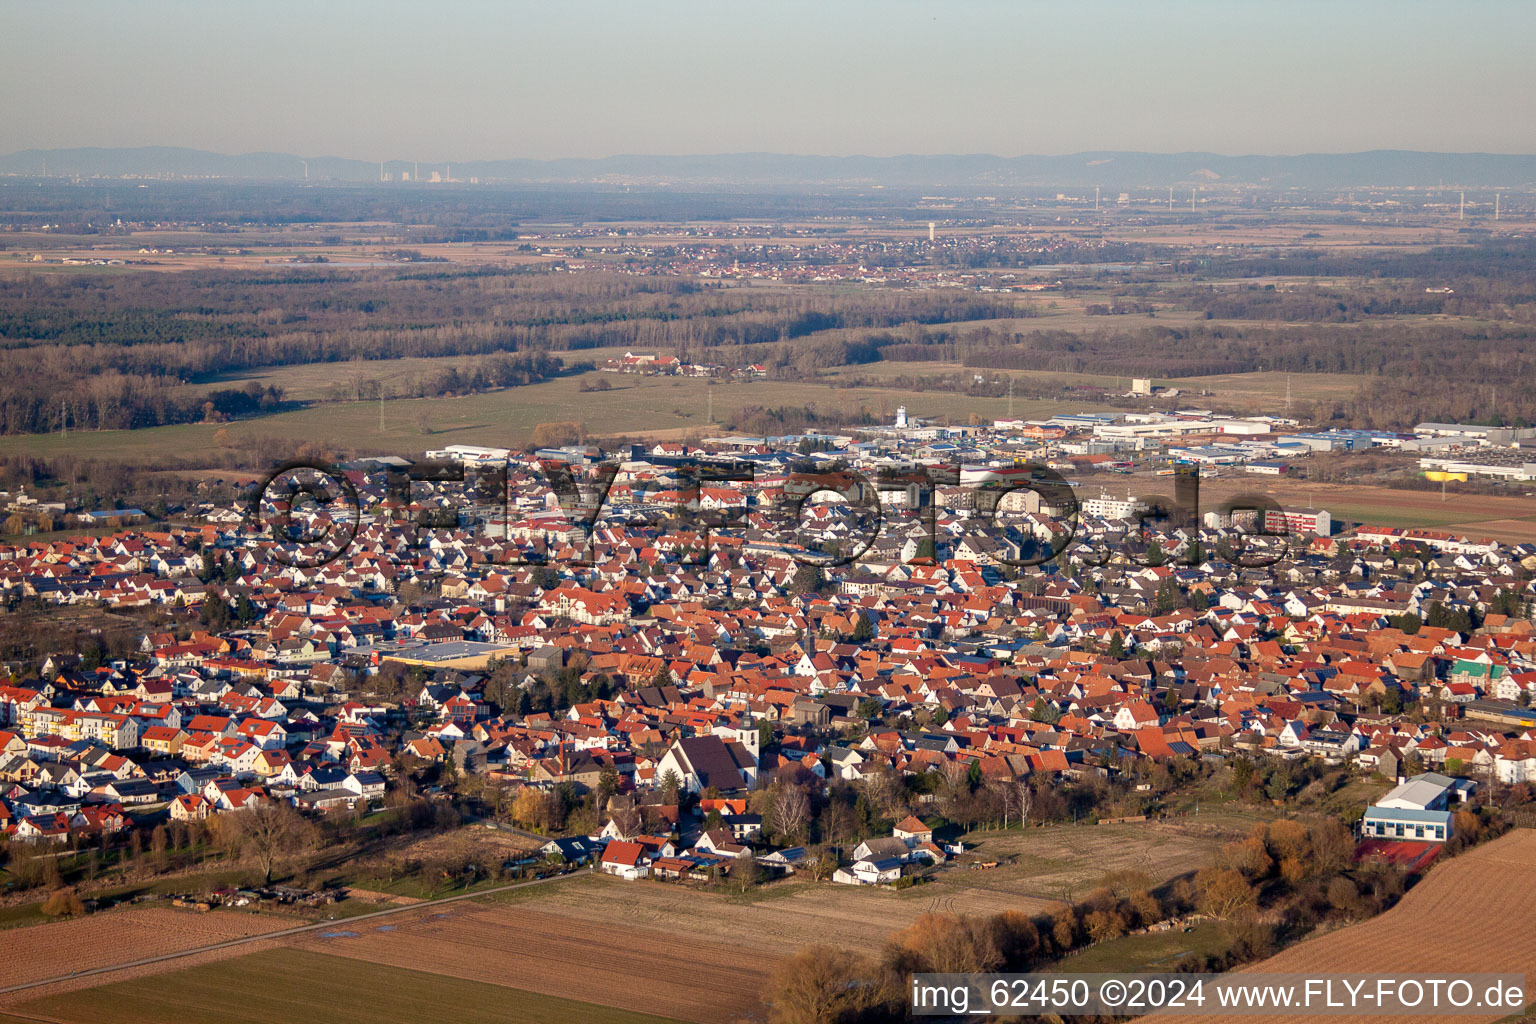 Bird's eye view of Offenbach an der Queich in the state Rhineland-Palatinate, Germany